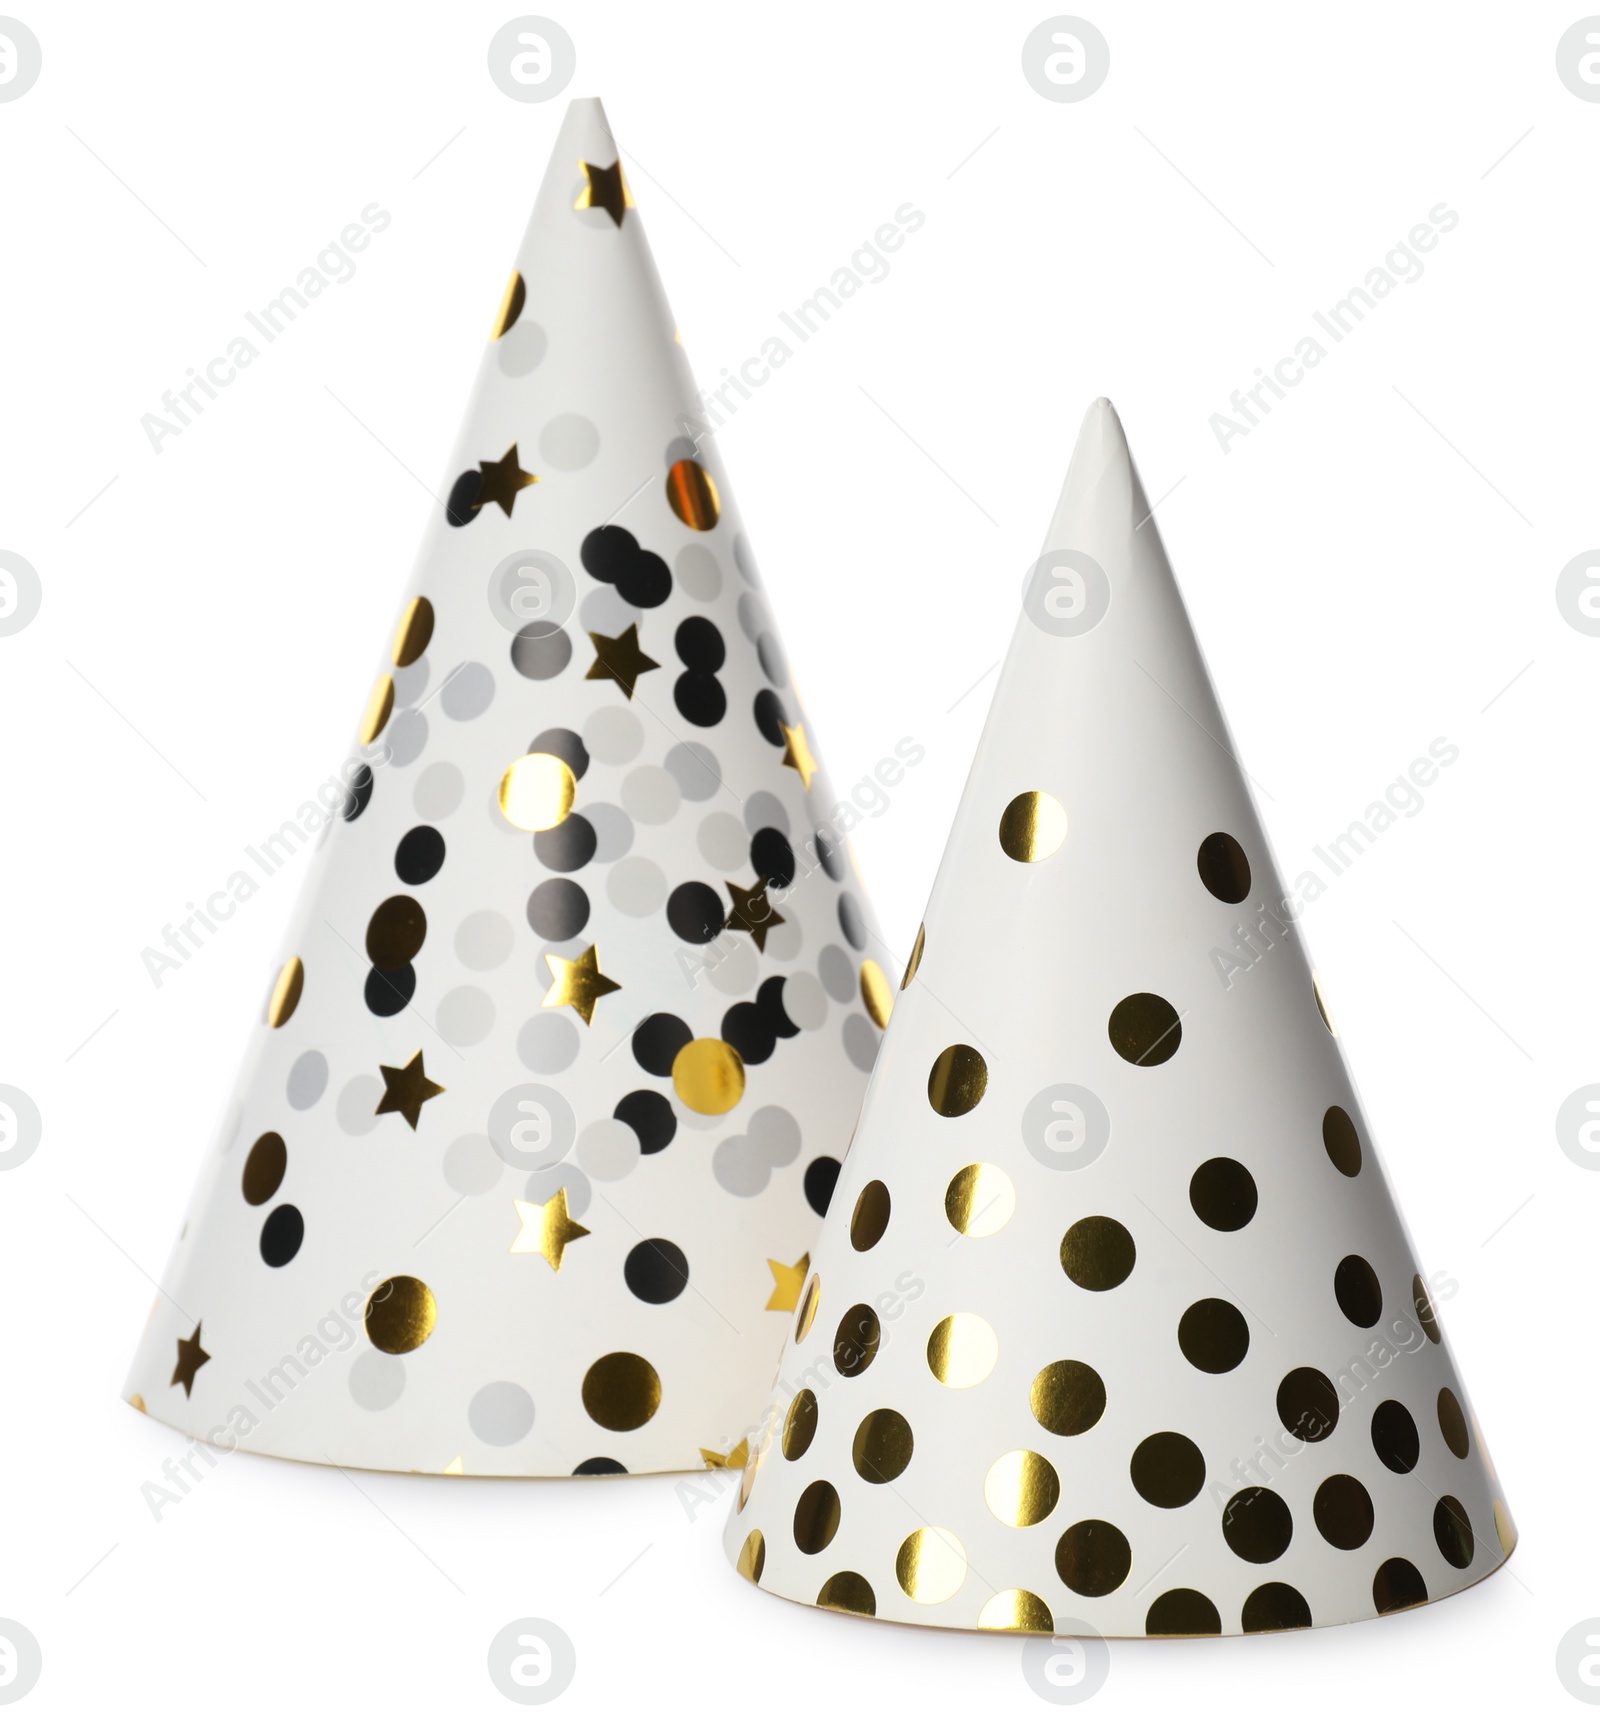 Photo of Party hats on white background. Festive items